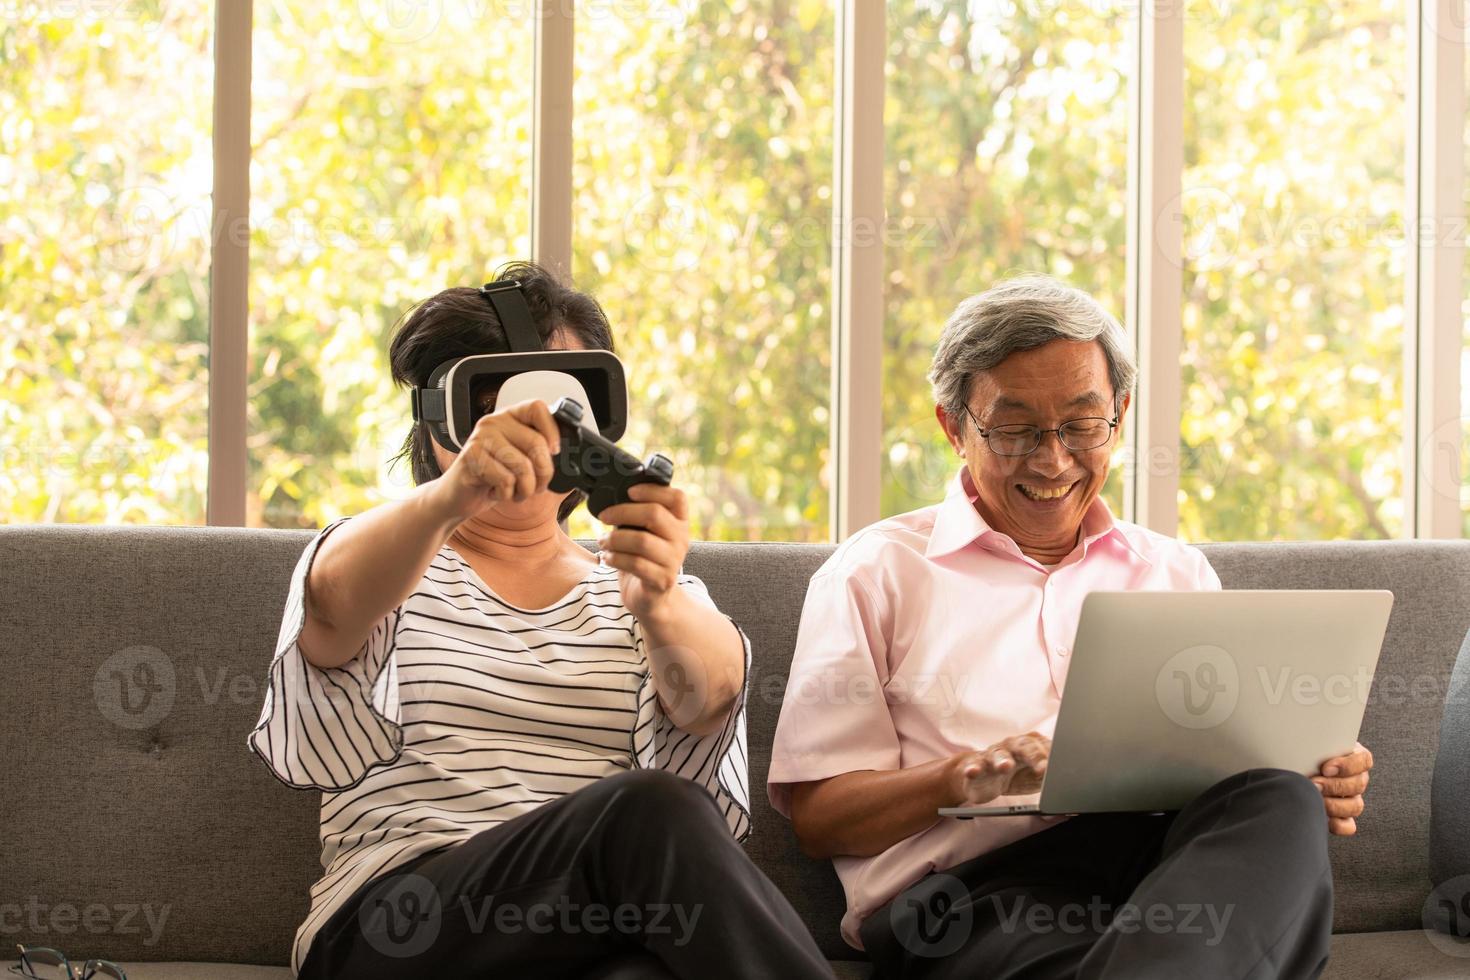 Senior Asian man and woman relax on holiday in the natural living room background with modern technology photo